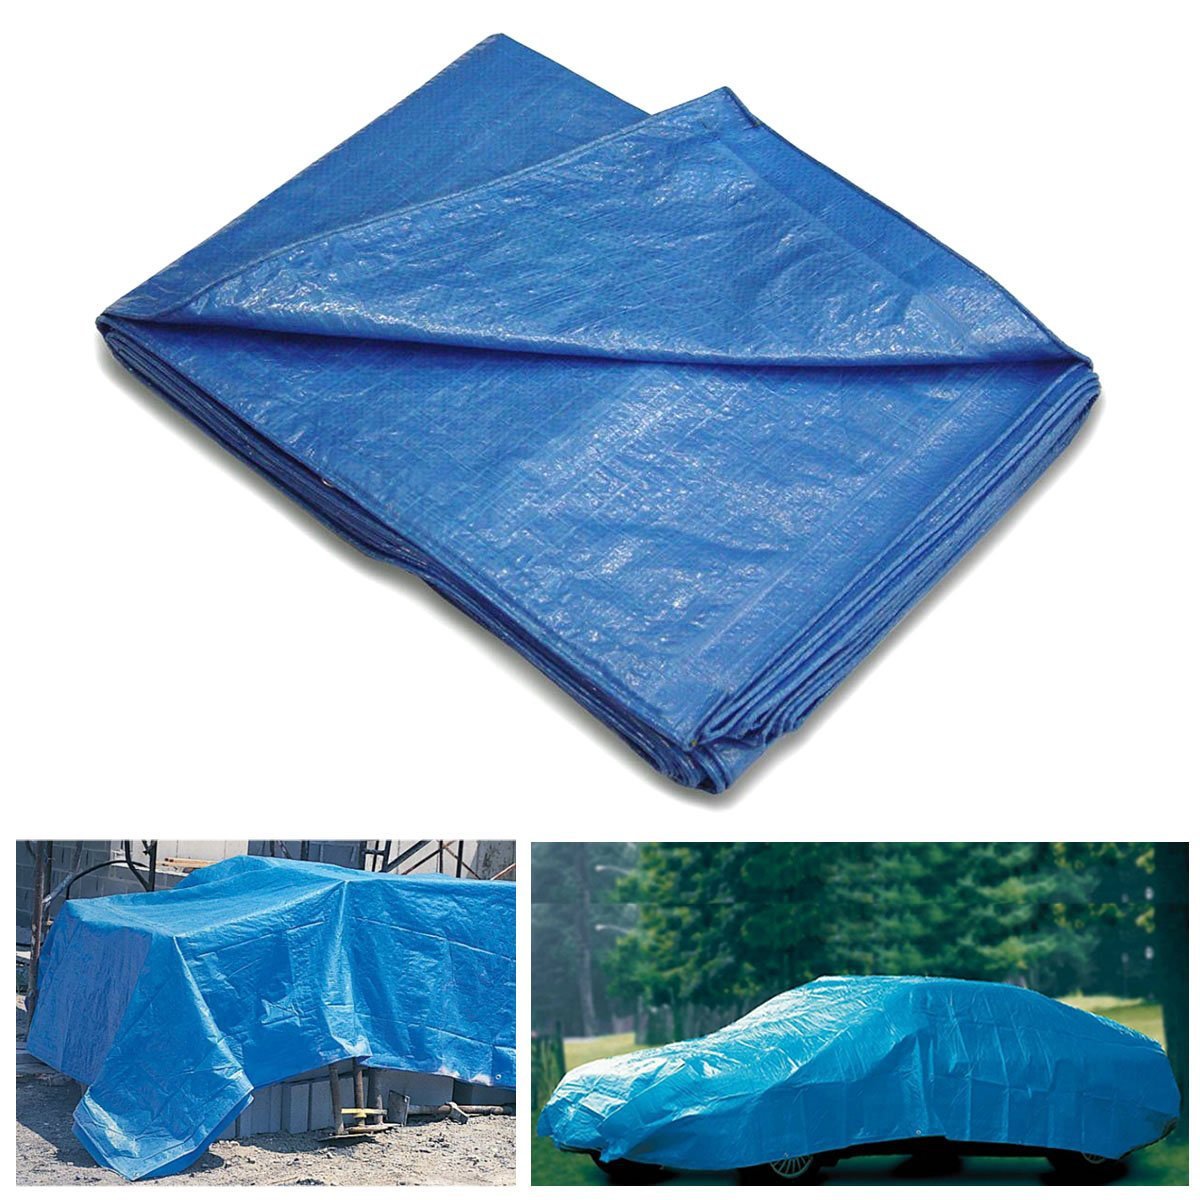 Soft Indoor Car Protective Poly-Cotton Breathable Full Car Cover 3m x 4m 5103 (Parcel Rate)